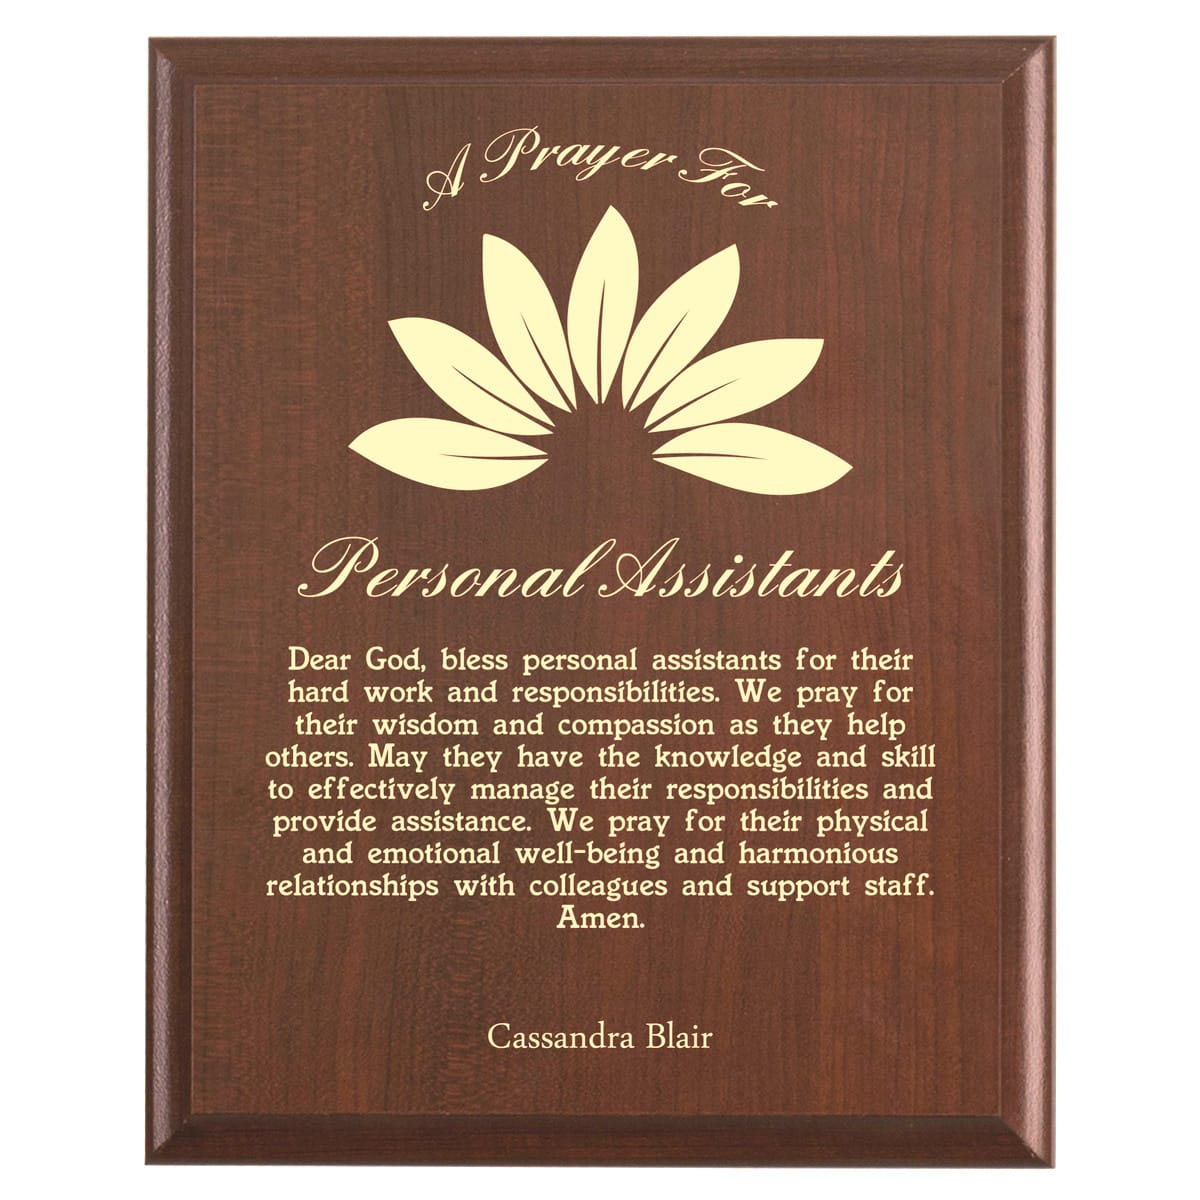 Plaque photo: Personal Assistant Prayer Plaque design with free personalization. Wood style finish with customized text.